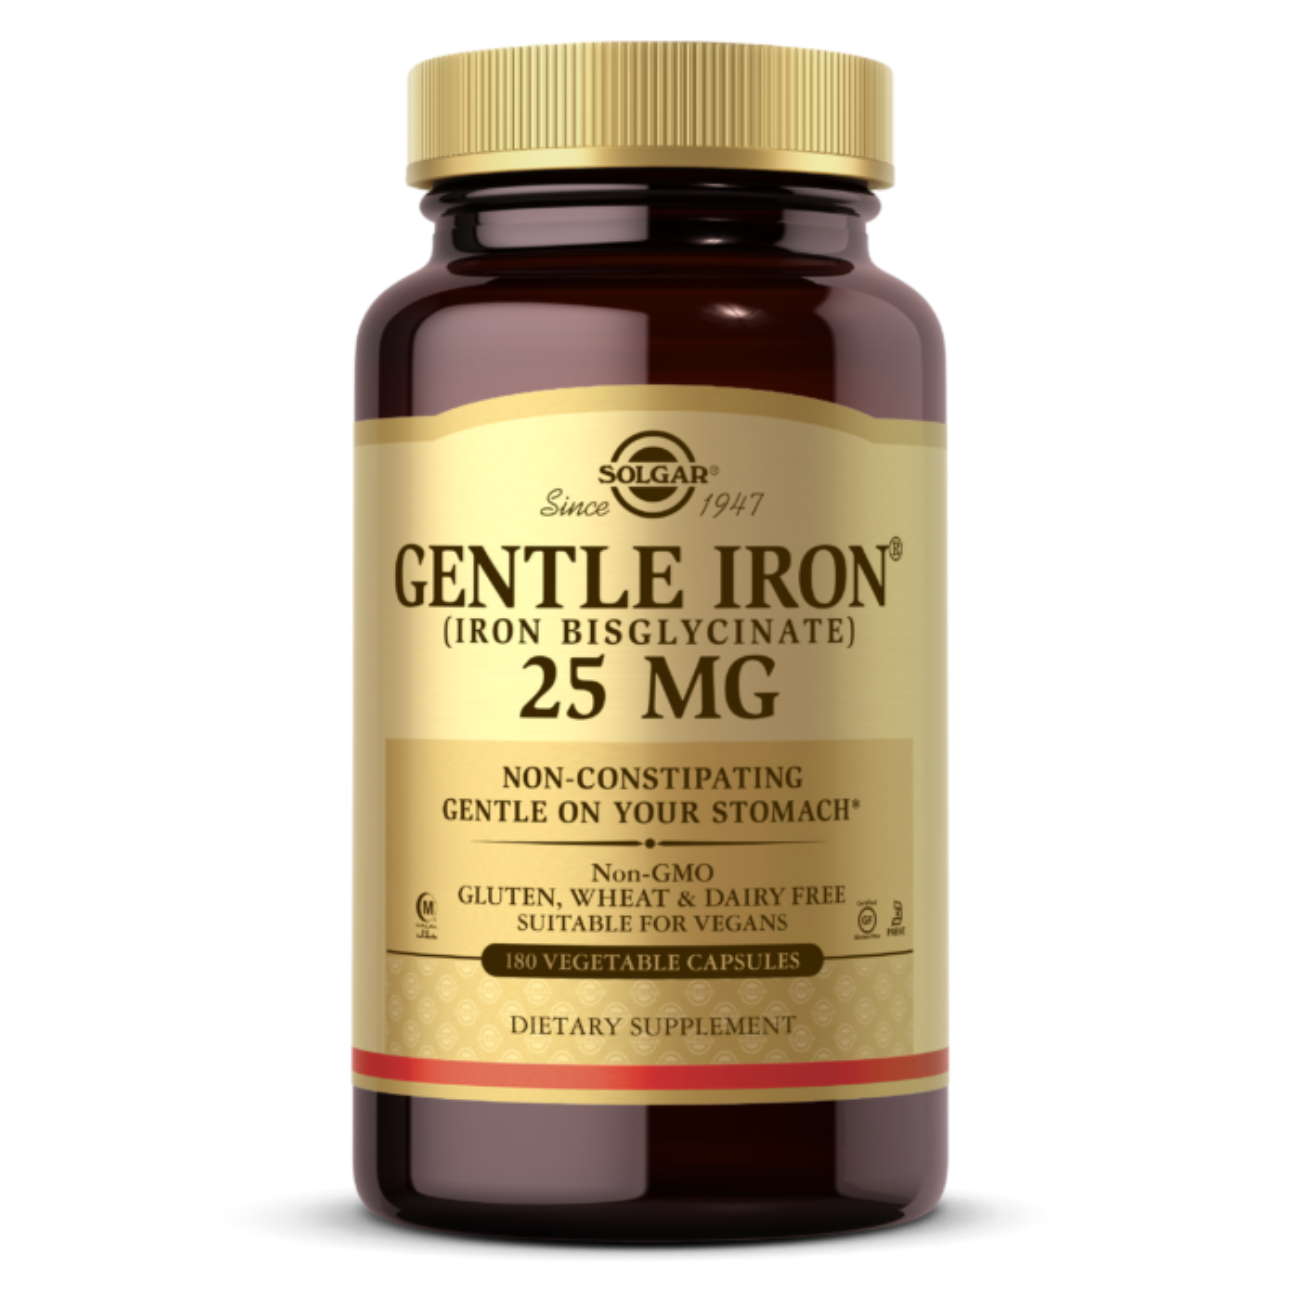 Gentle Iron (Iron Bisglycinate) 20 mg - 180 Vegetable Capsules